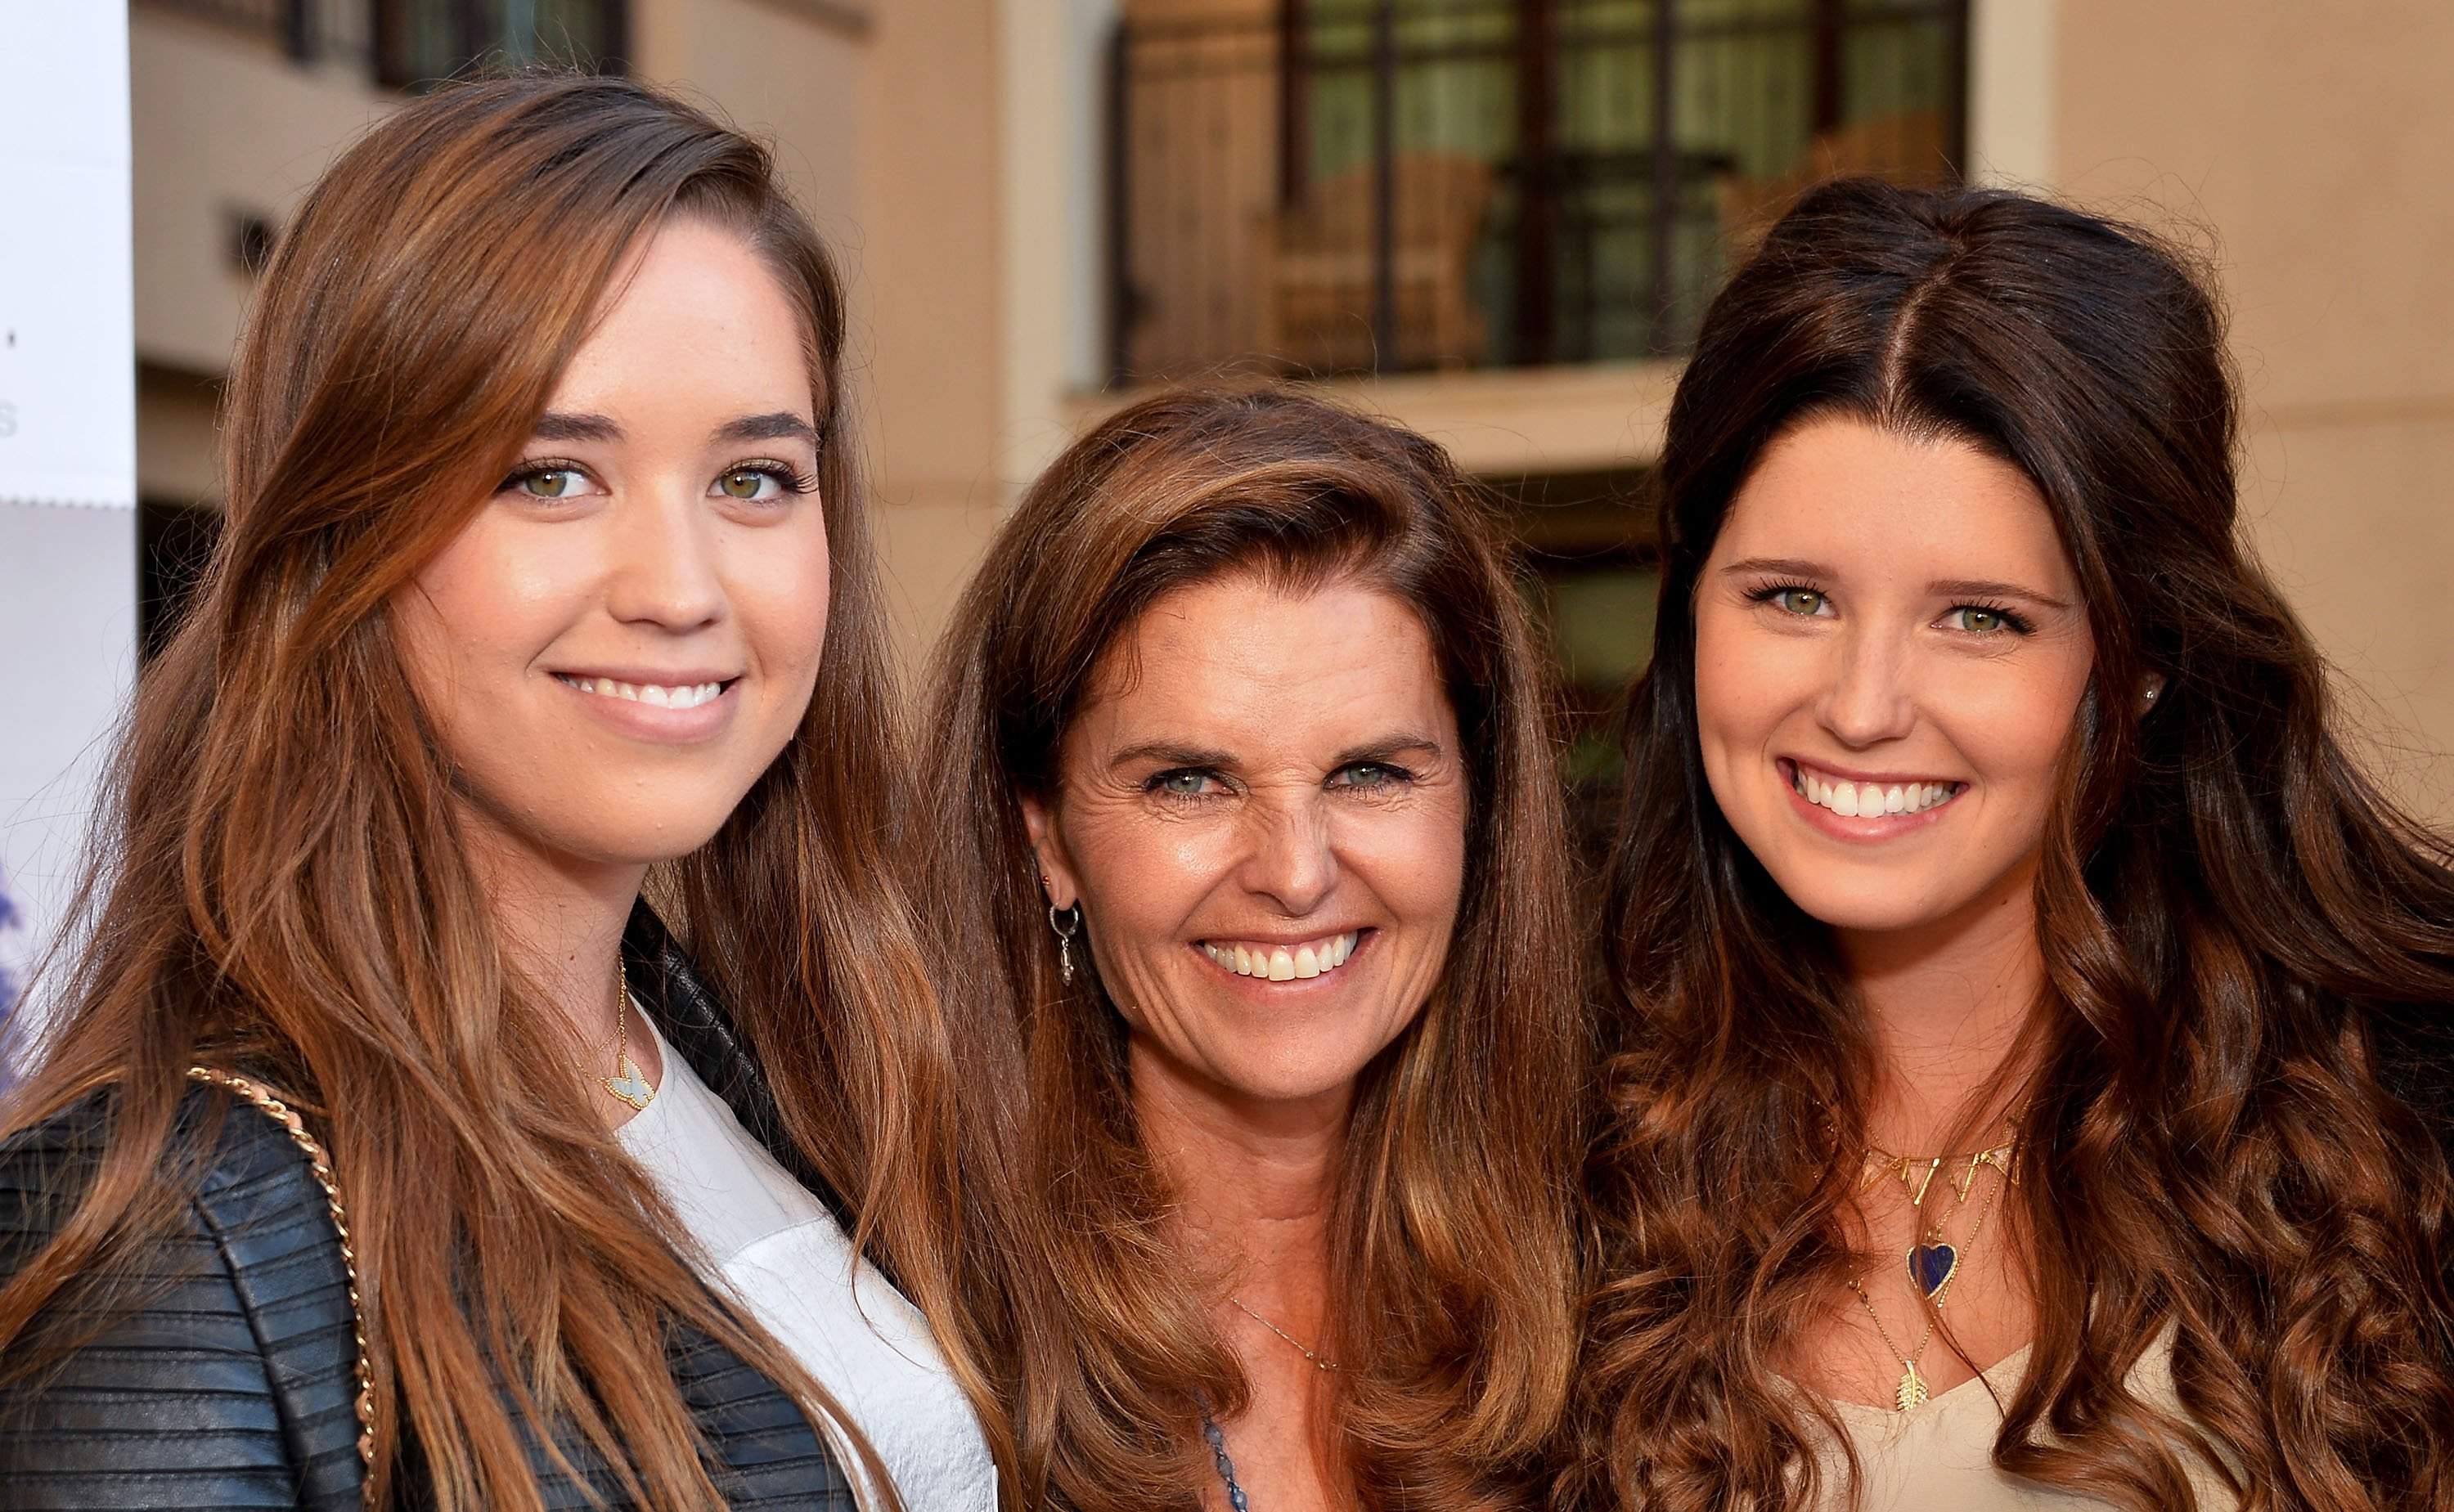 Christina Schwarzenegger, Maria Shiver, and Katherine Schwarzenegger at the Team Maria benefit for Best Buddies at Montage Beverly Hills on August 18, 2013. | Source: Getty Images